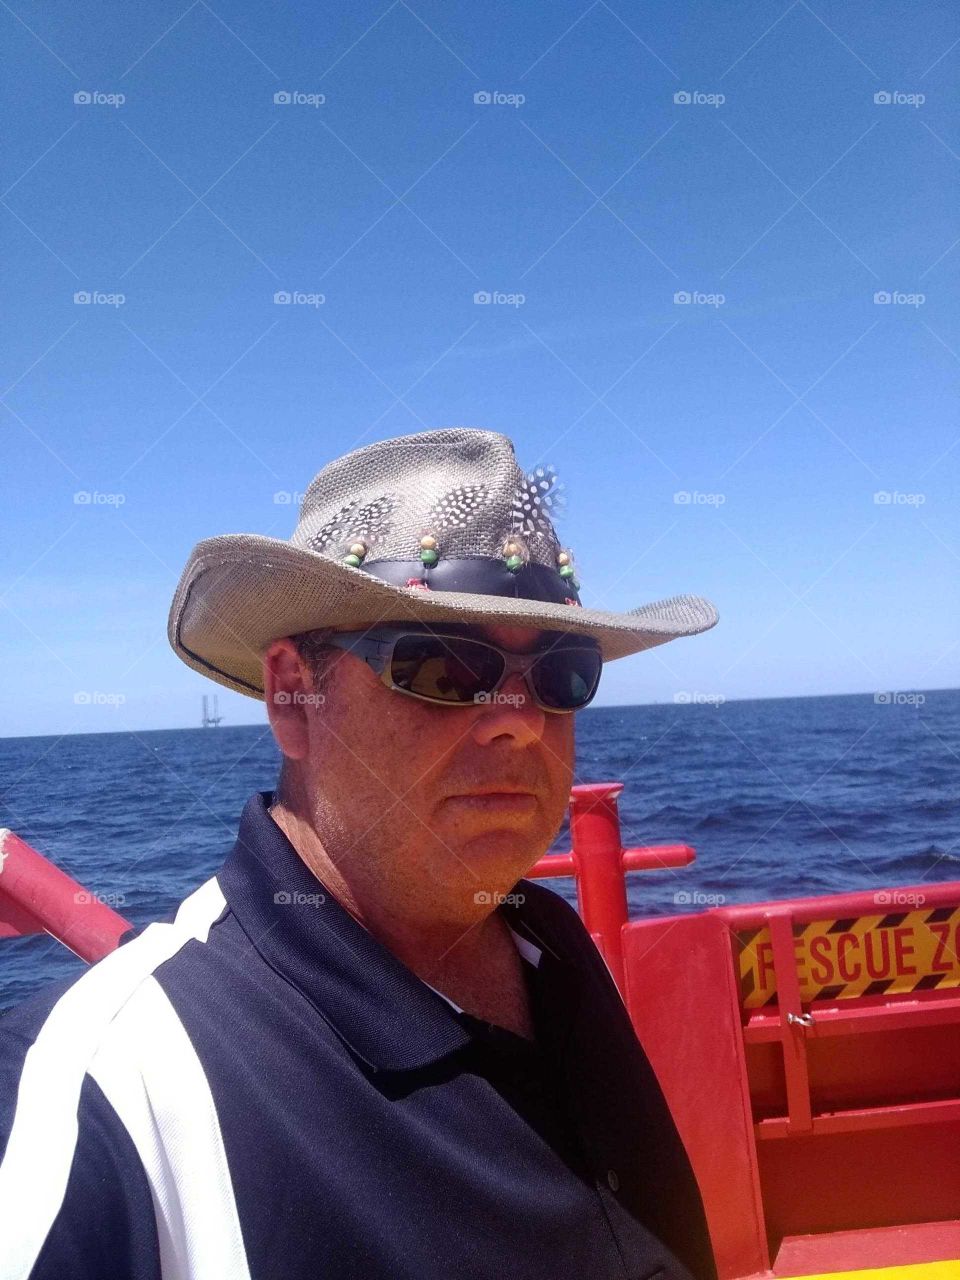 we offshore in the gulf of Mexico on the boat I work on